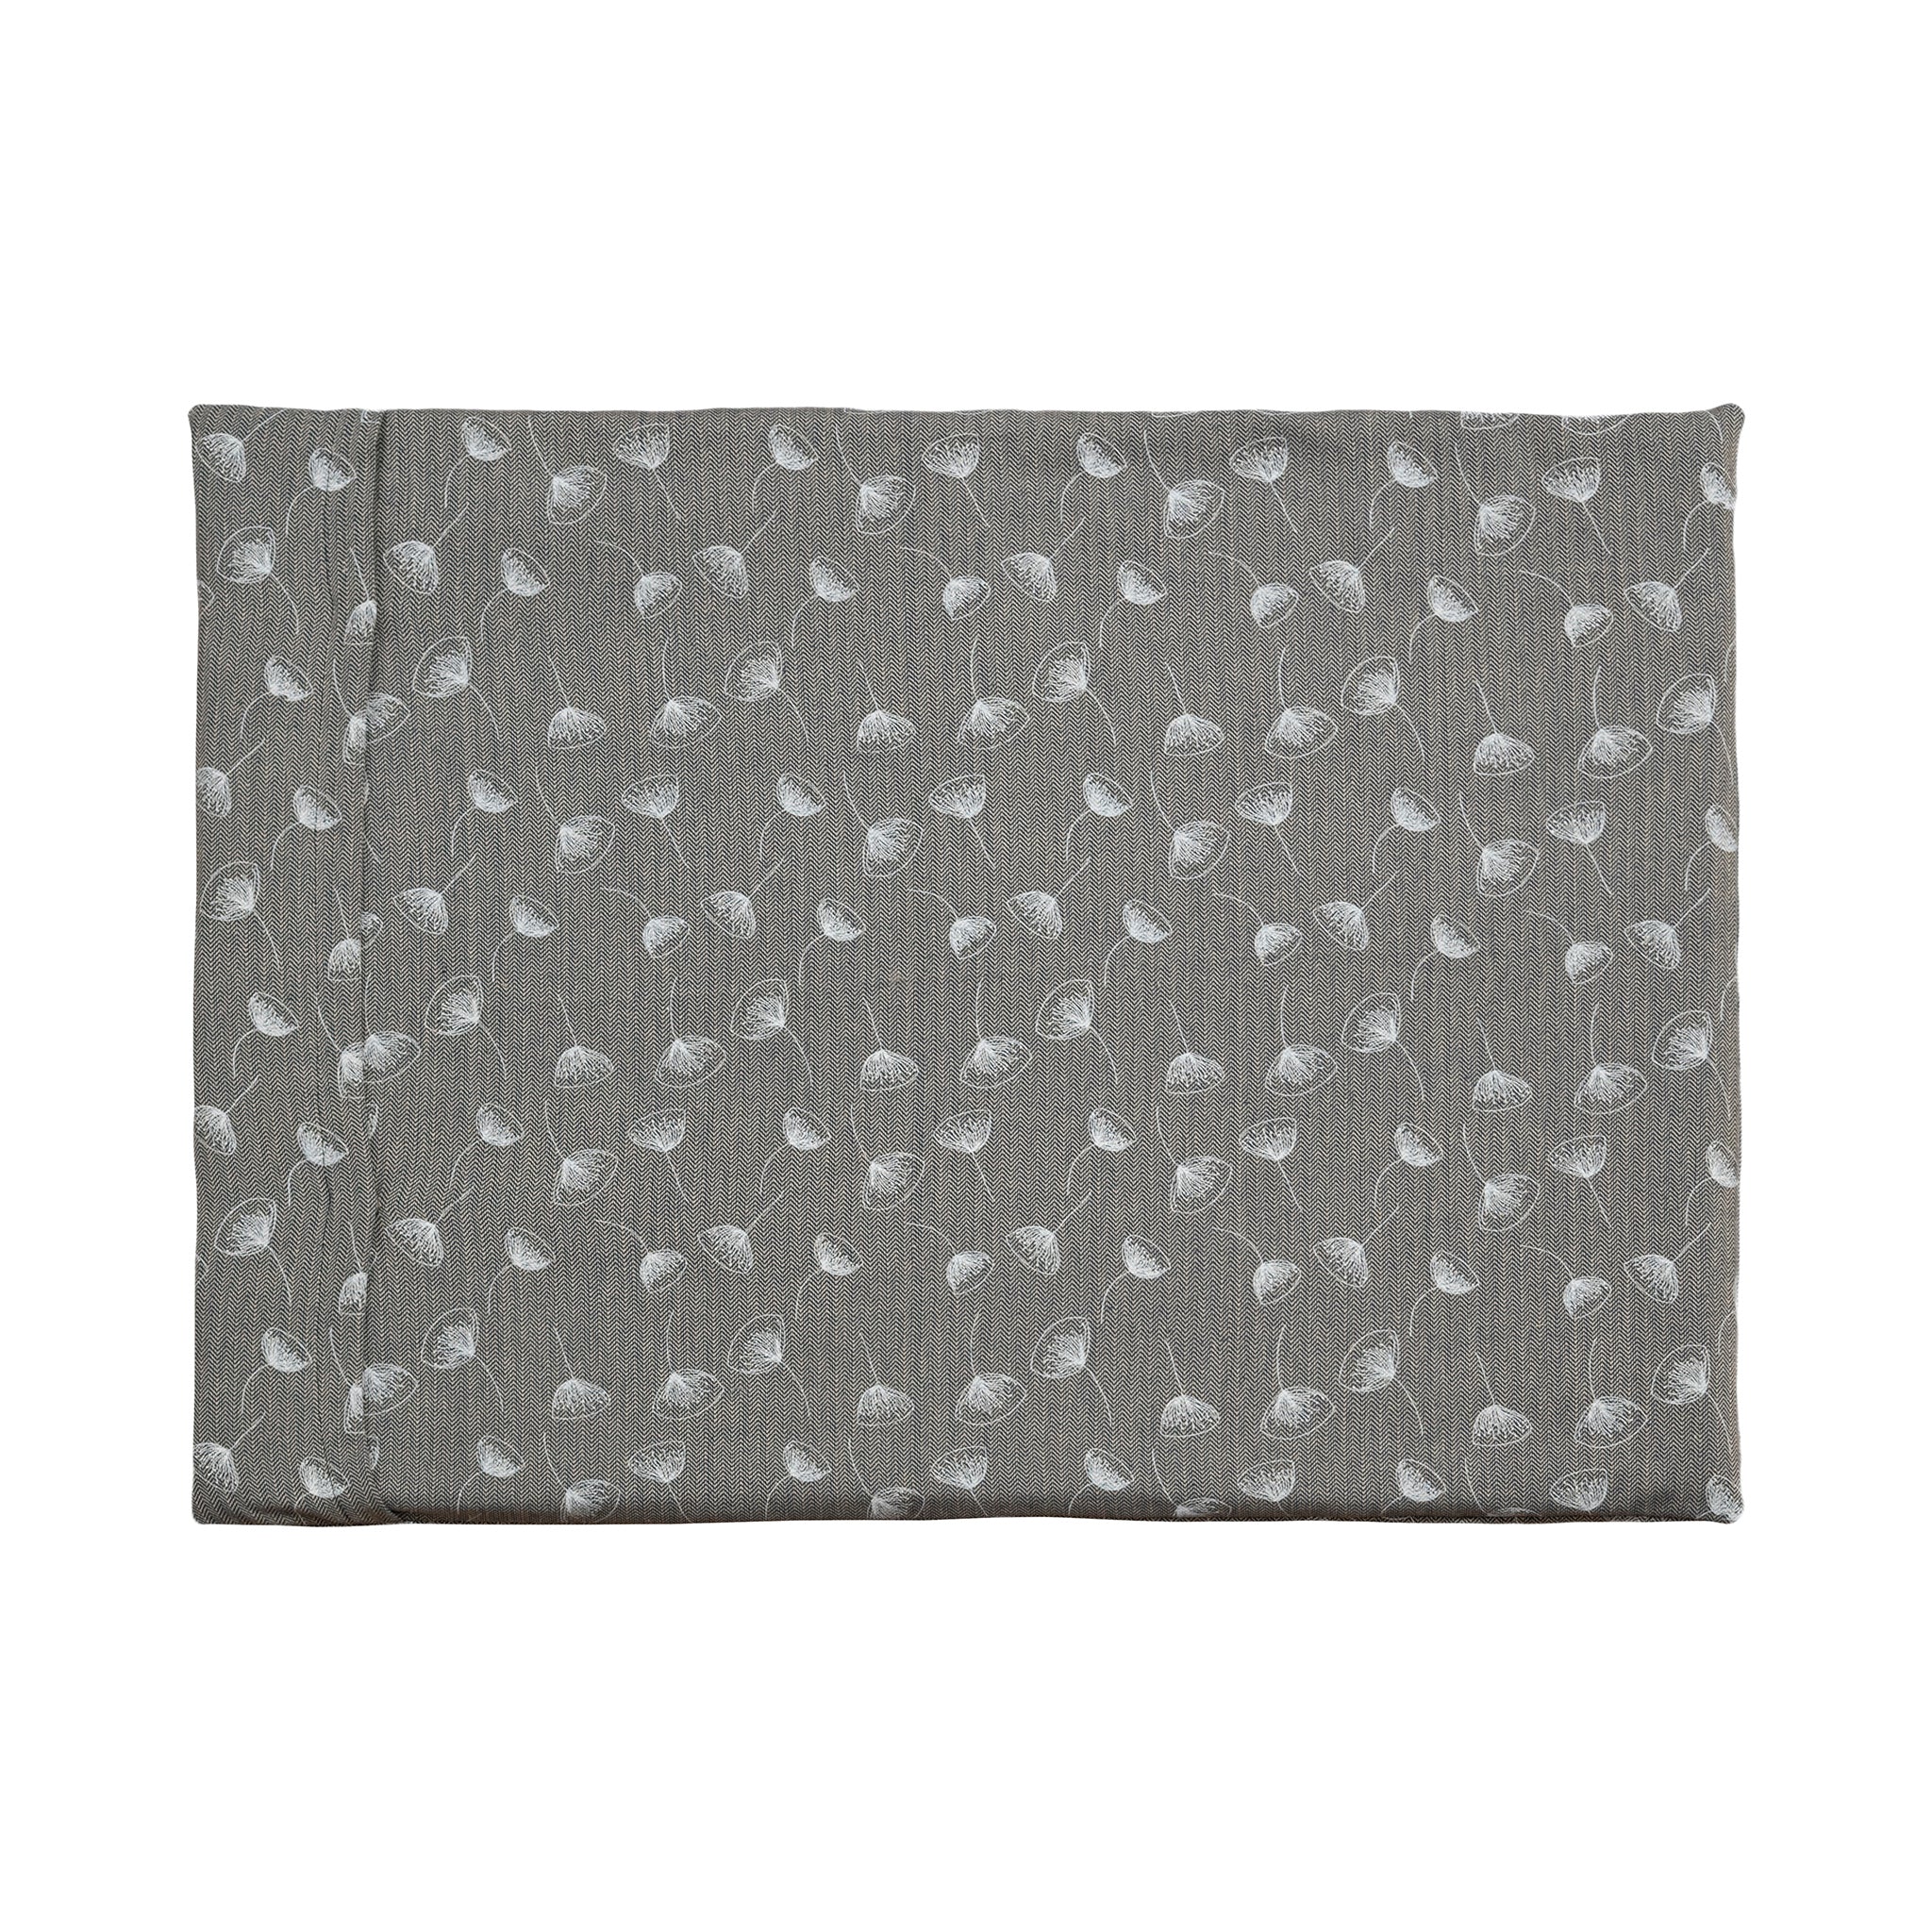 A Chimney Sheep Luxury felted wool dog bed. The bed is large and rectangular. This luxury wool dog bed is placed onto a white background. The organic cotton cover is patterned. The pattern is grey with white flowers.